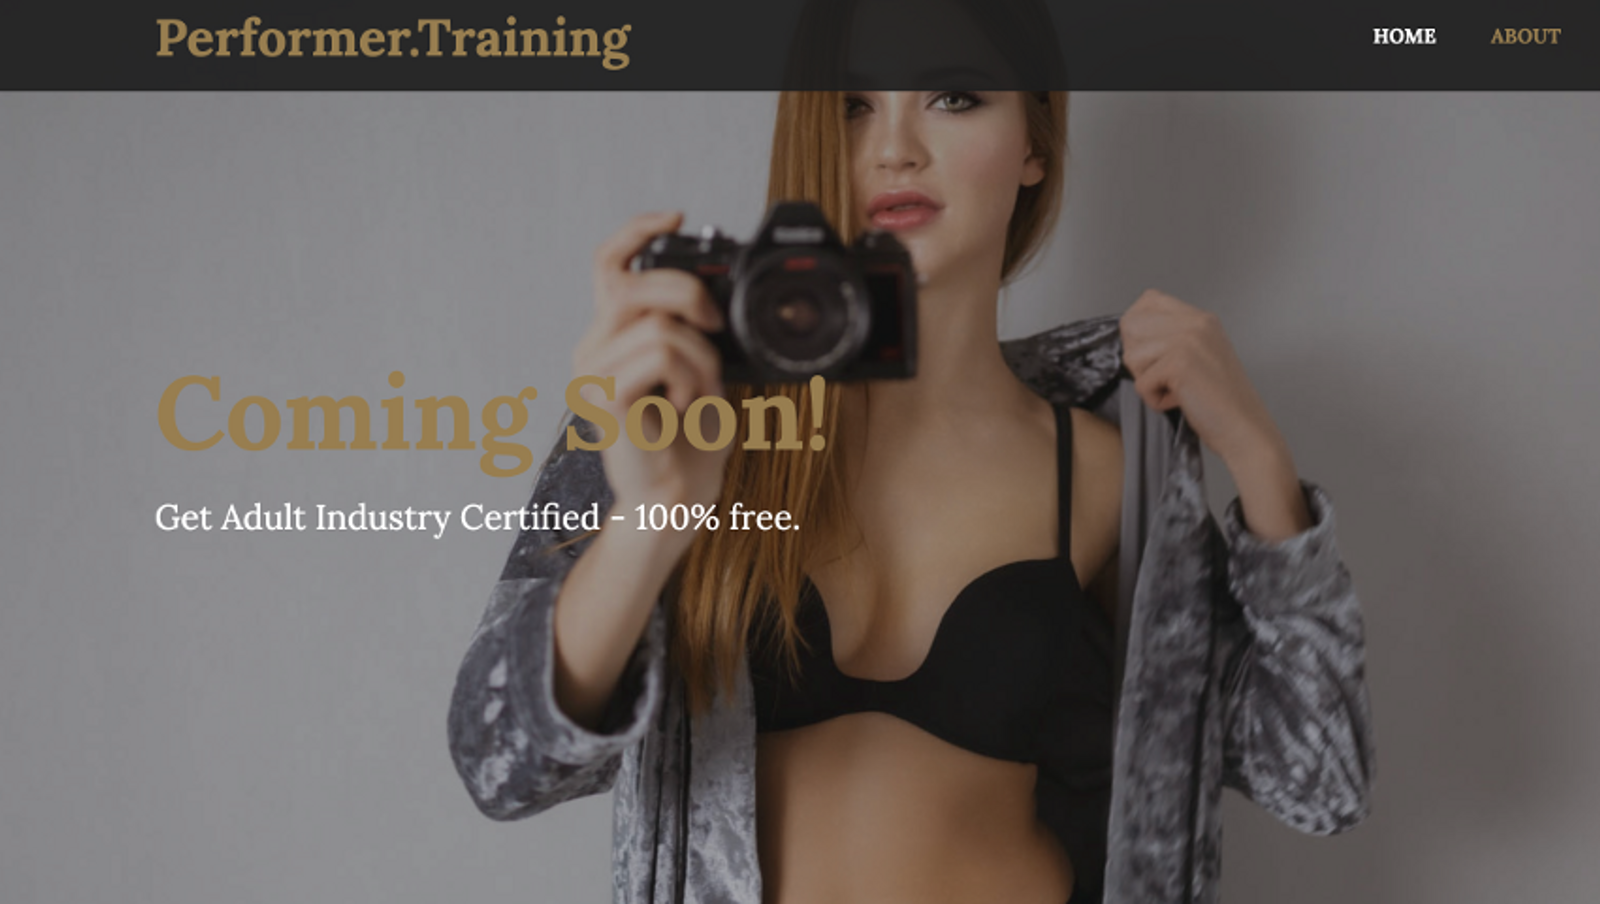 Porn Performers Offer Online ‘Training’ In Response to AB 2389